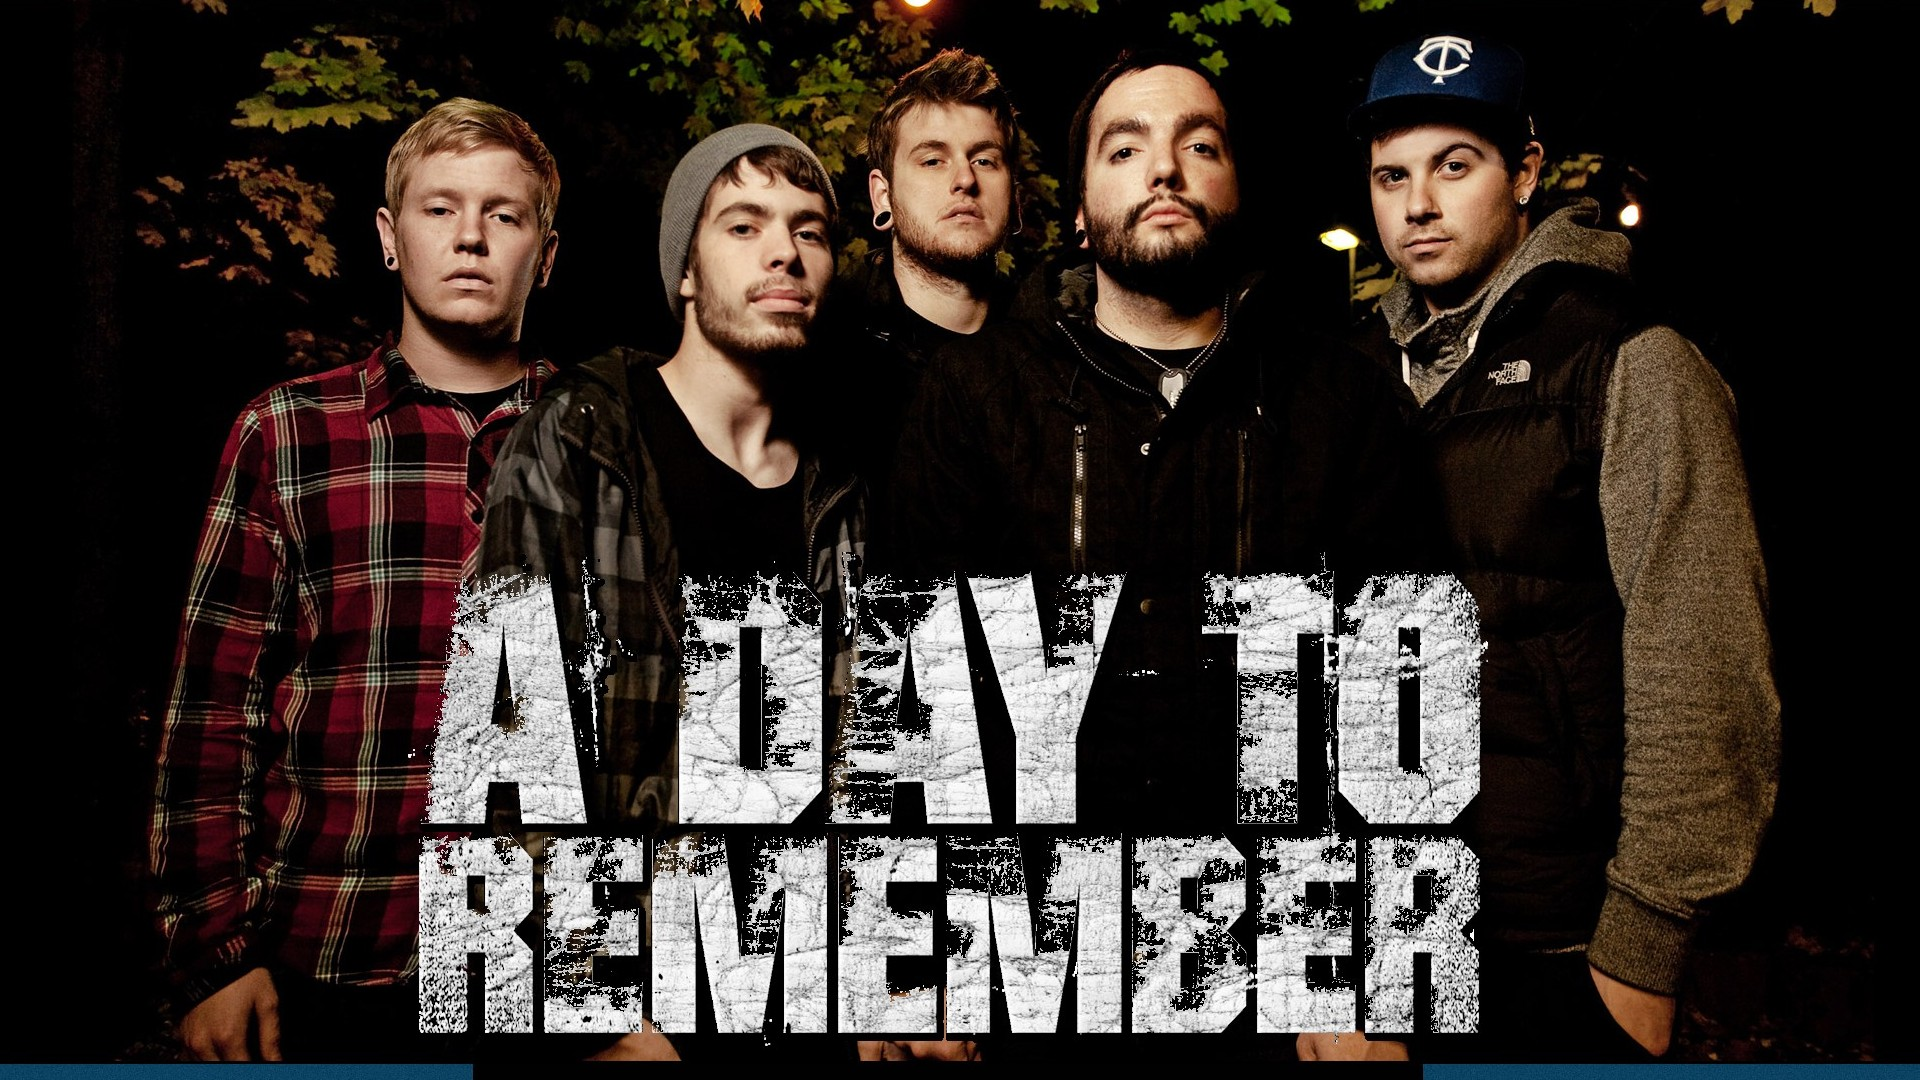 Holiday to remember. Группа a Day to remember. A Day to remember Band. A Day to remember 2020. Плакат группы a Day to remember.